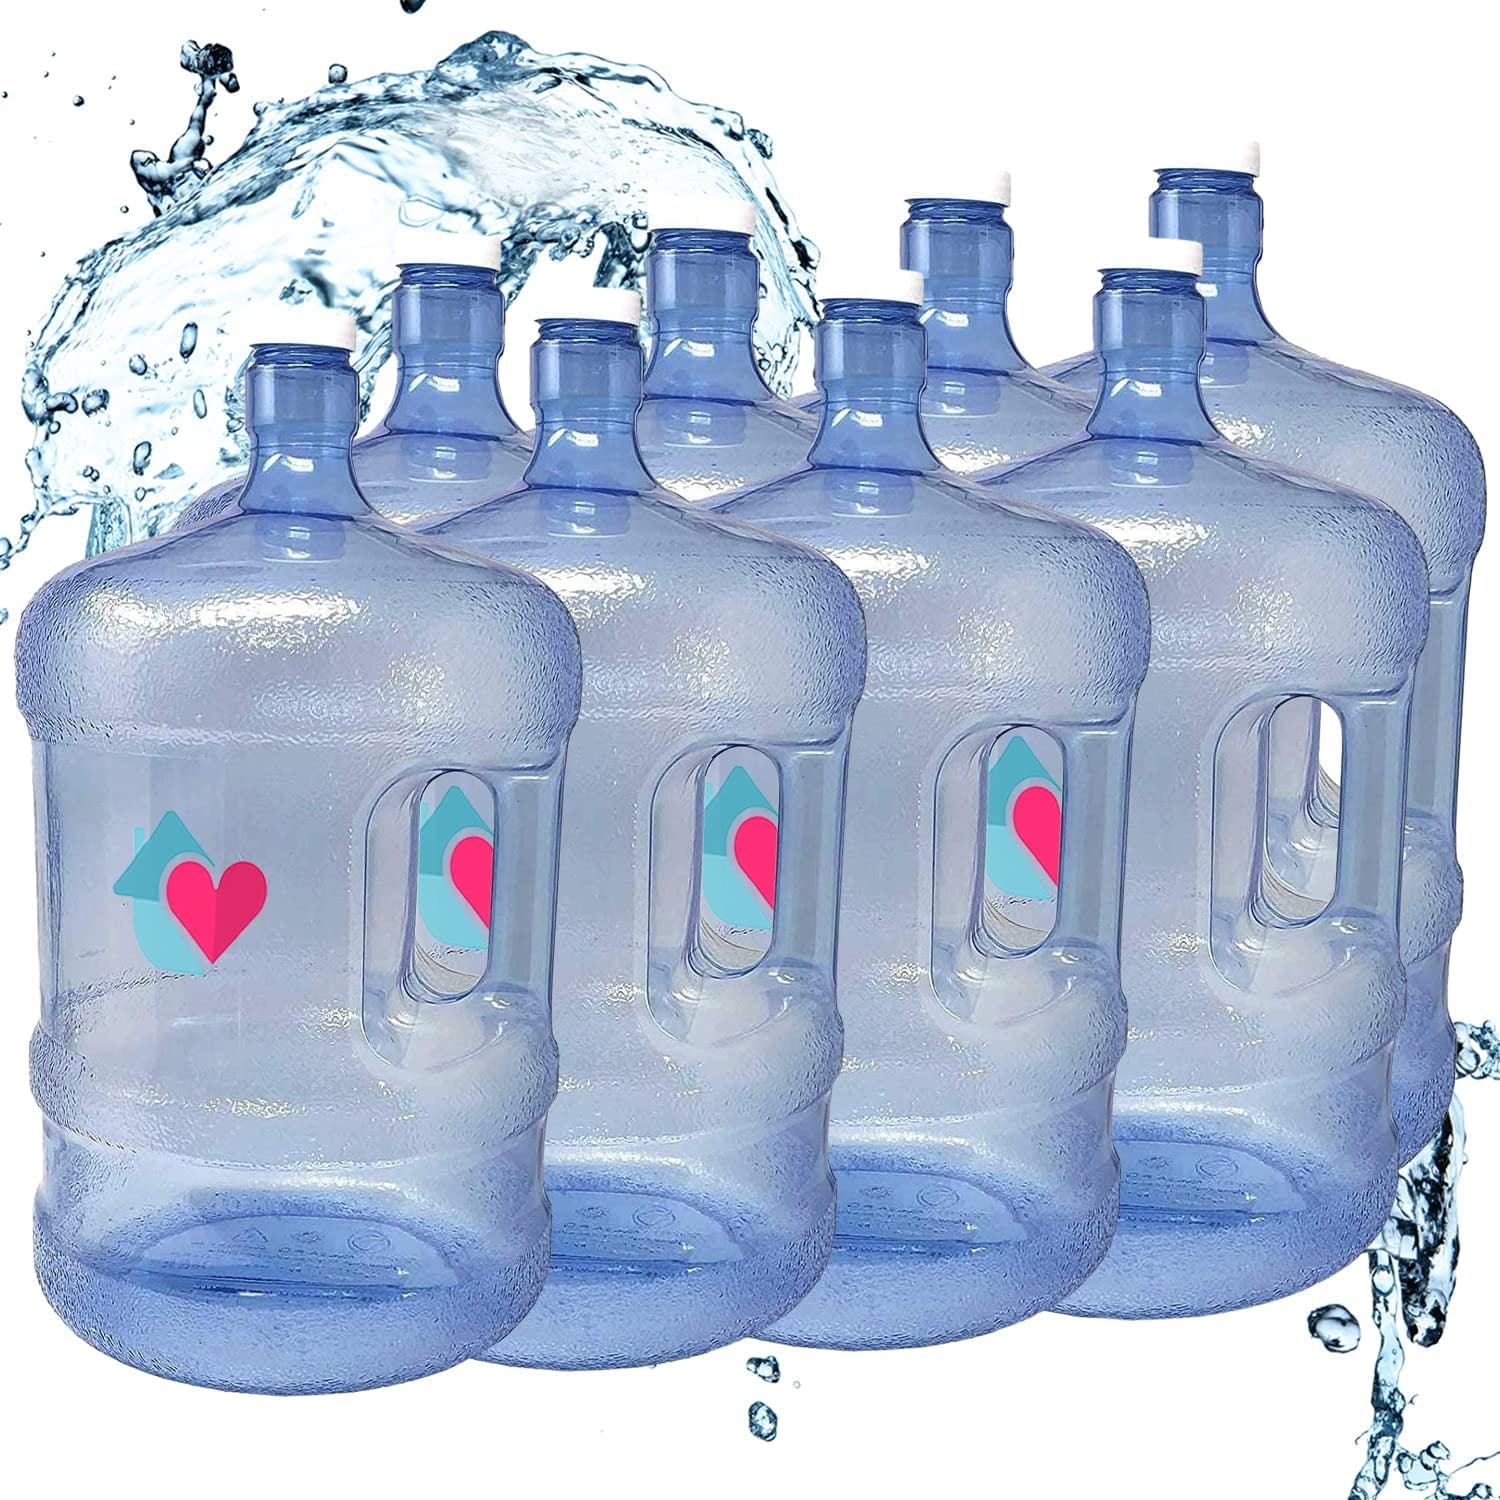 5 Gallon Crown Top Reusable Plastic Water Bottles Containers Jugs with Easy  Grip Handle for Home and Office, Tailgating, & Camping 2 PACK